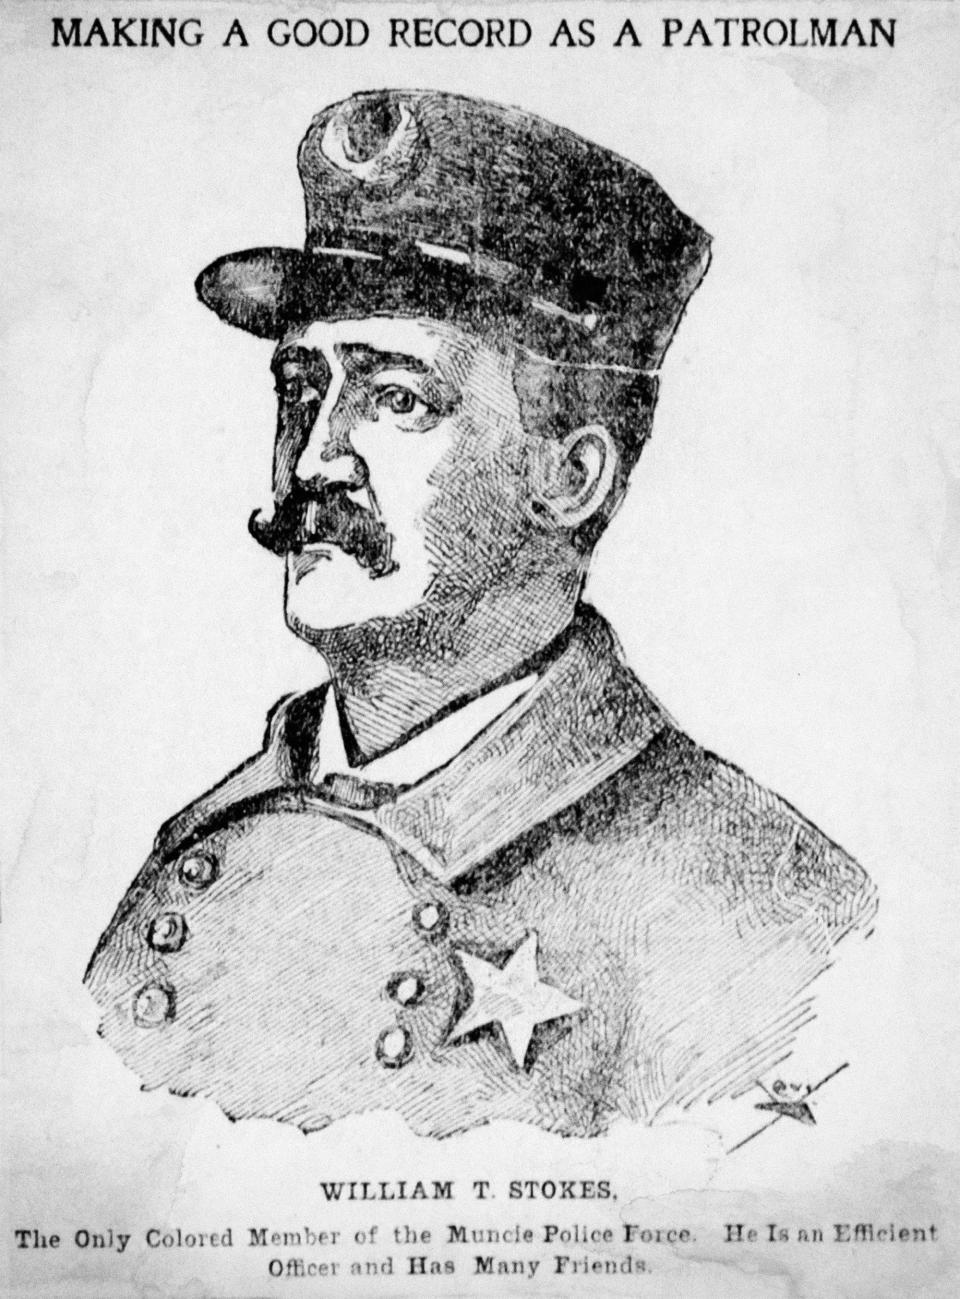 Drawing of William T. Stokes from the Muncie Star, Tuesday, January 23, 1900.